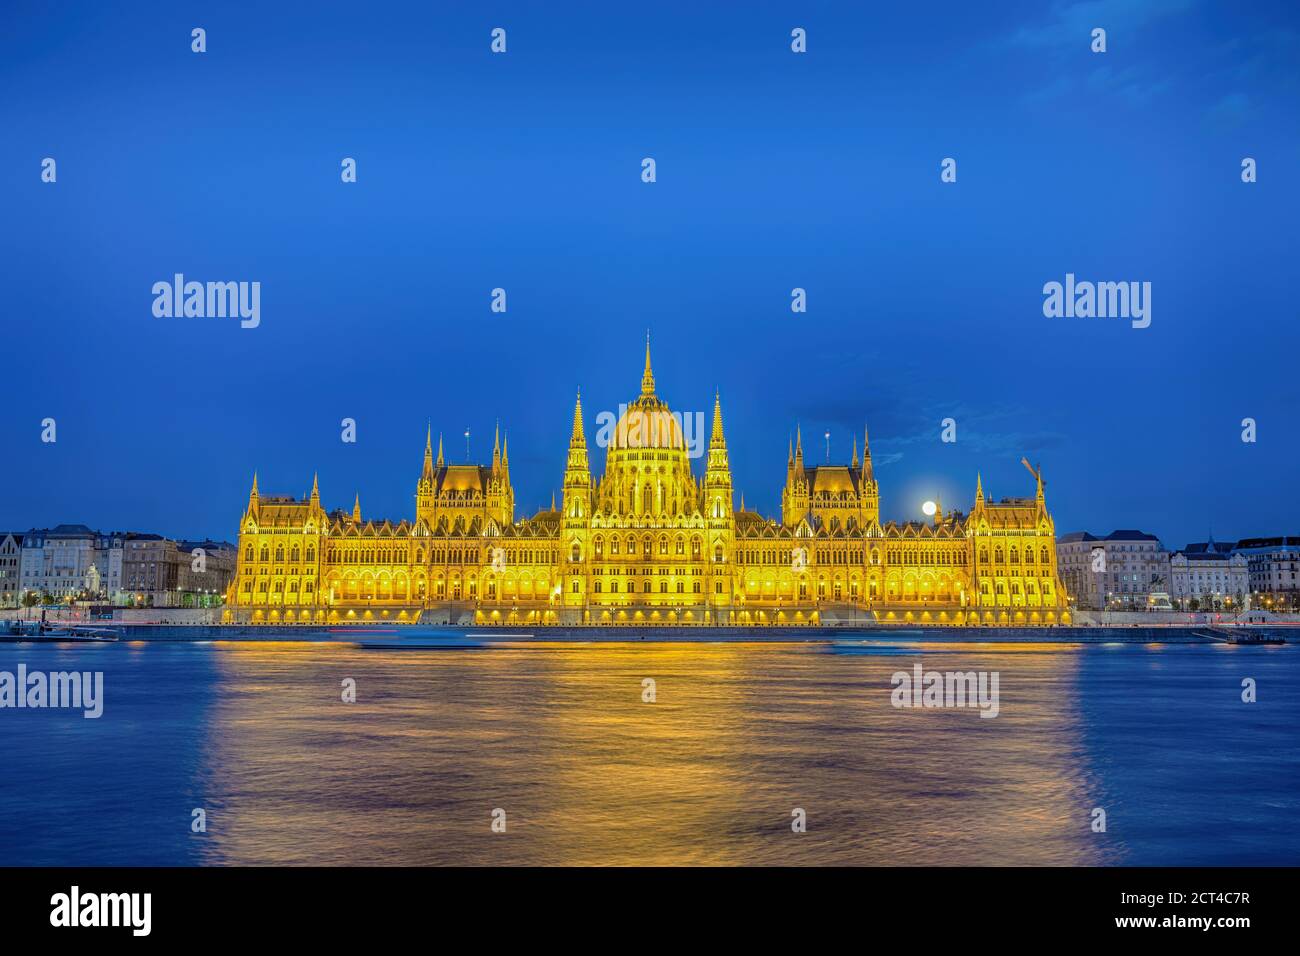 Budapest Hungary, night city skyline at Hungarian Parliament and Danube River Stock Photo